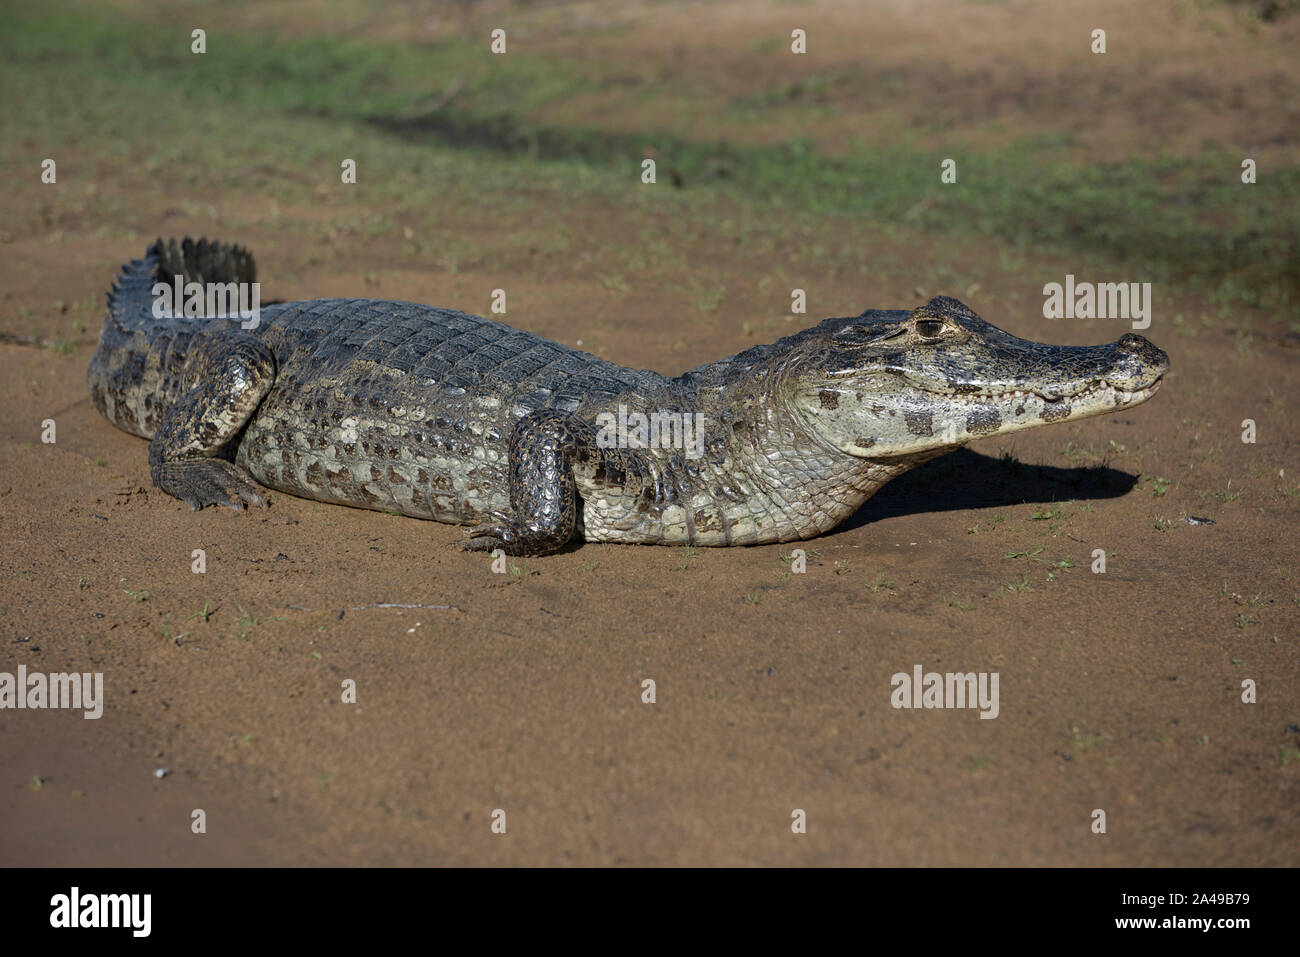 Alligator in the Brazilian wetlands, know as Pantanal, during a sunny day Stock Photo